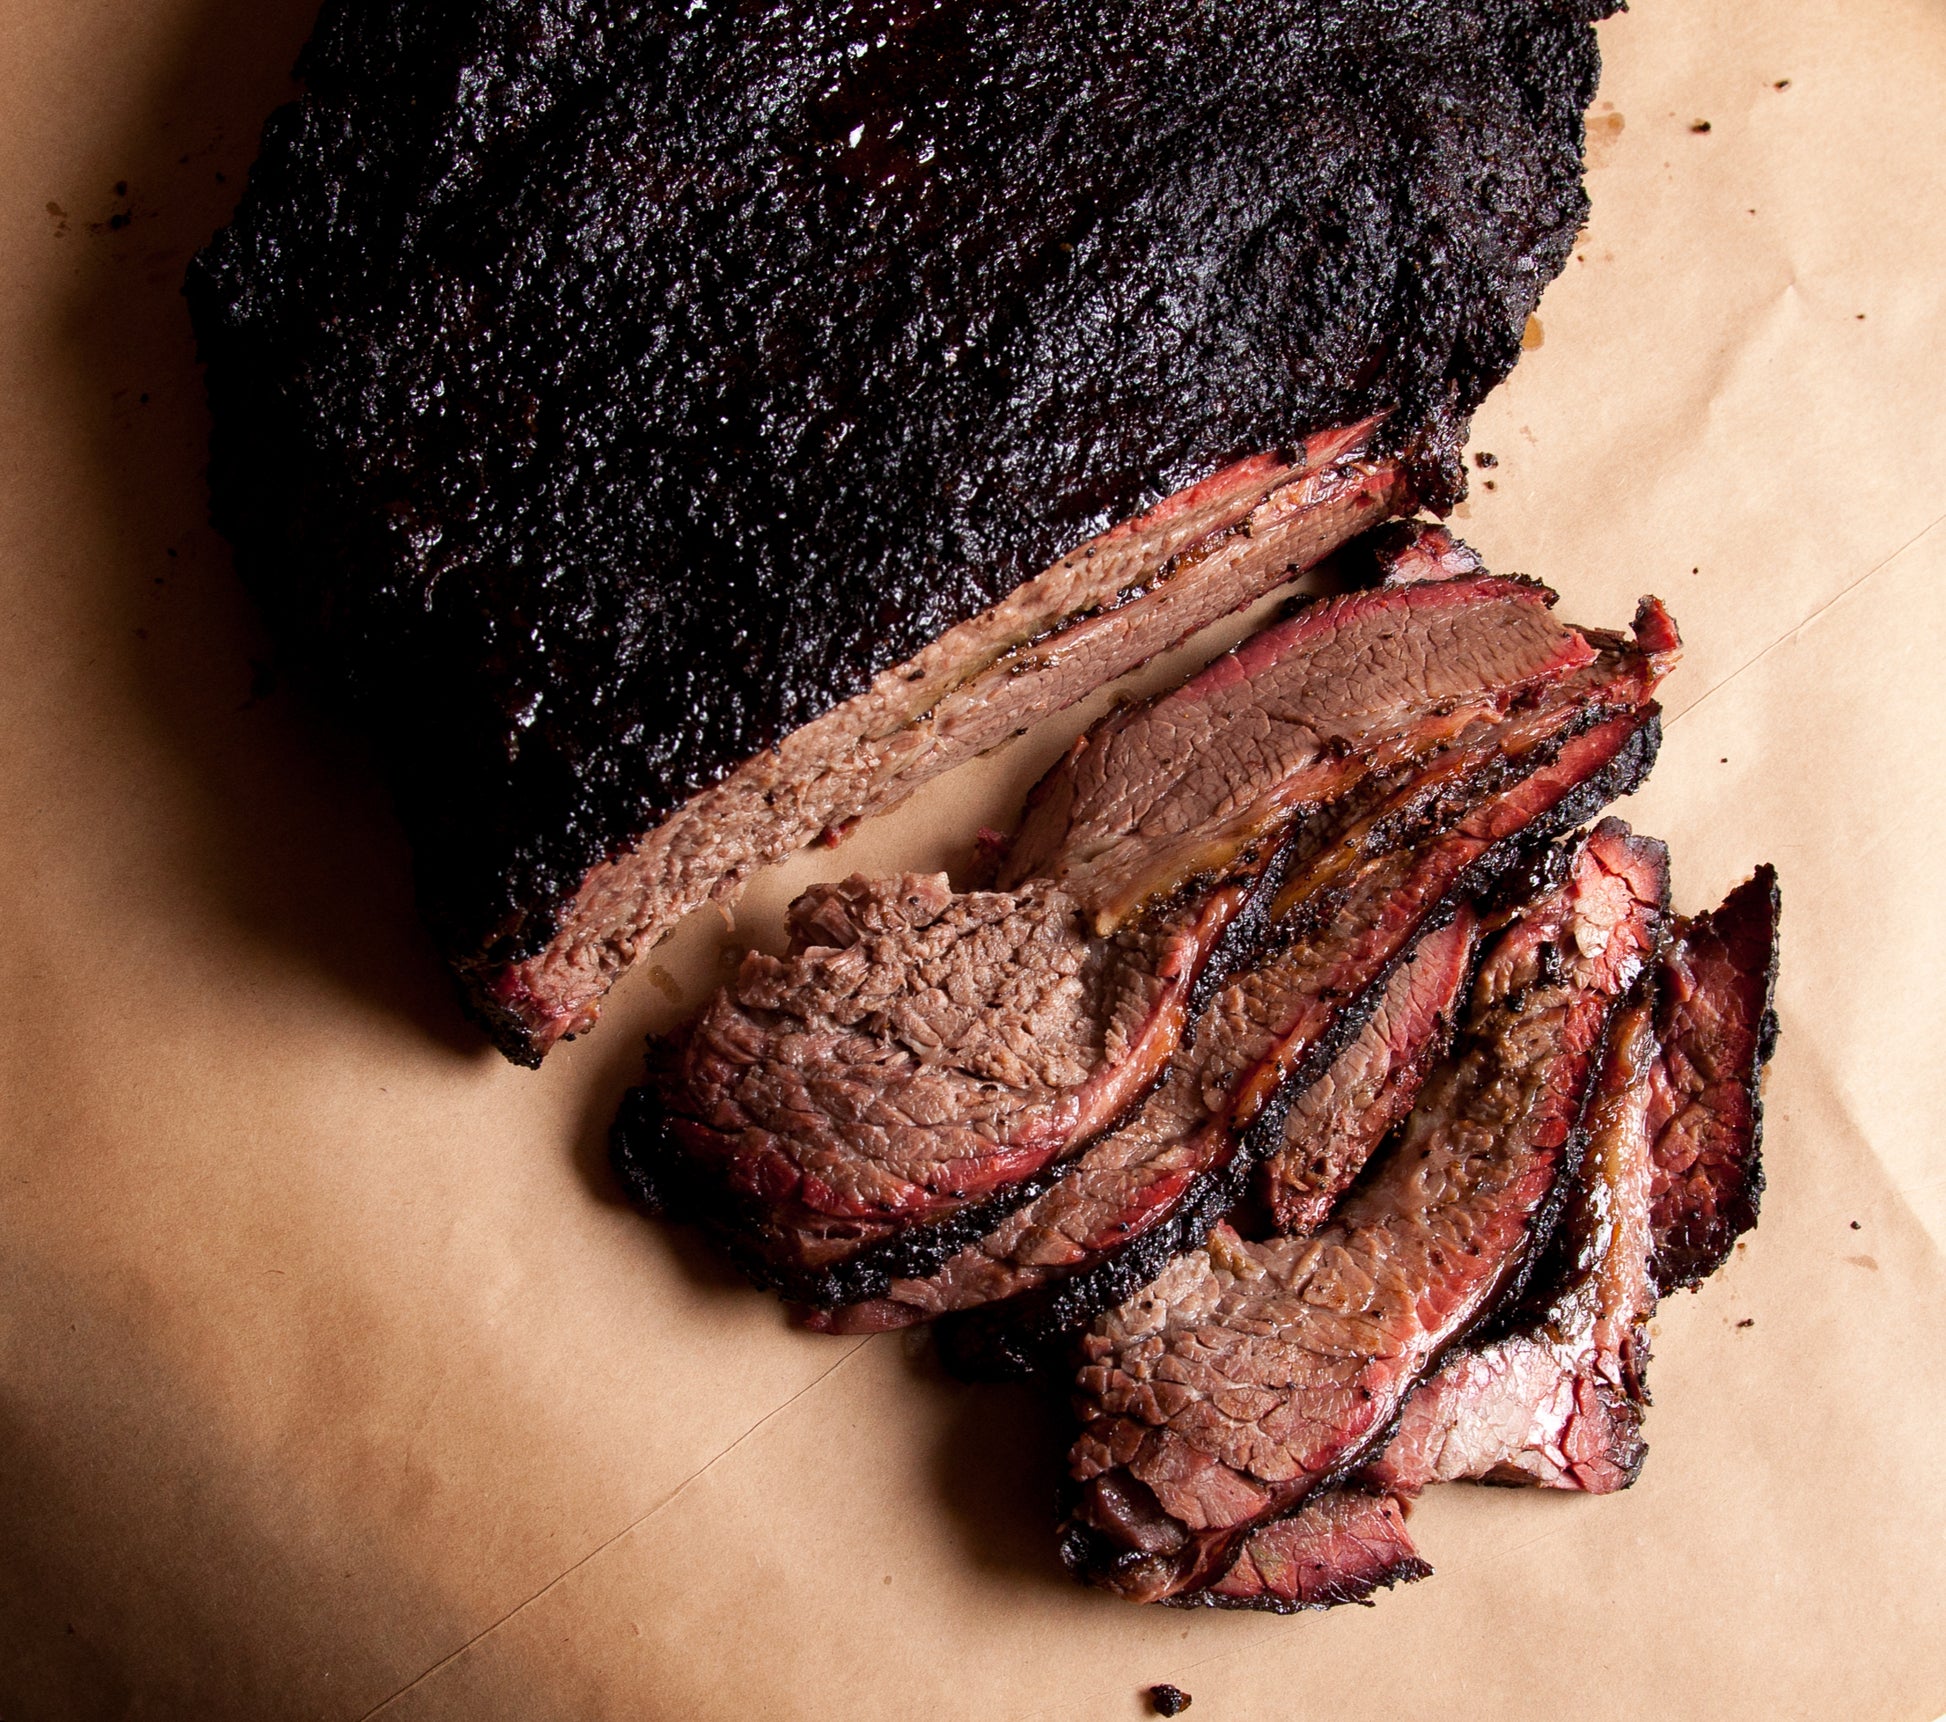 Whole Smoked Brisket with Slices